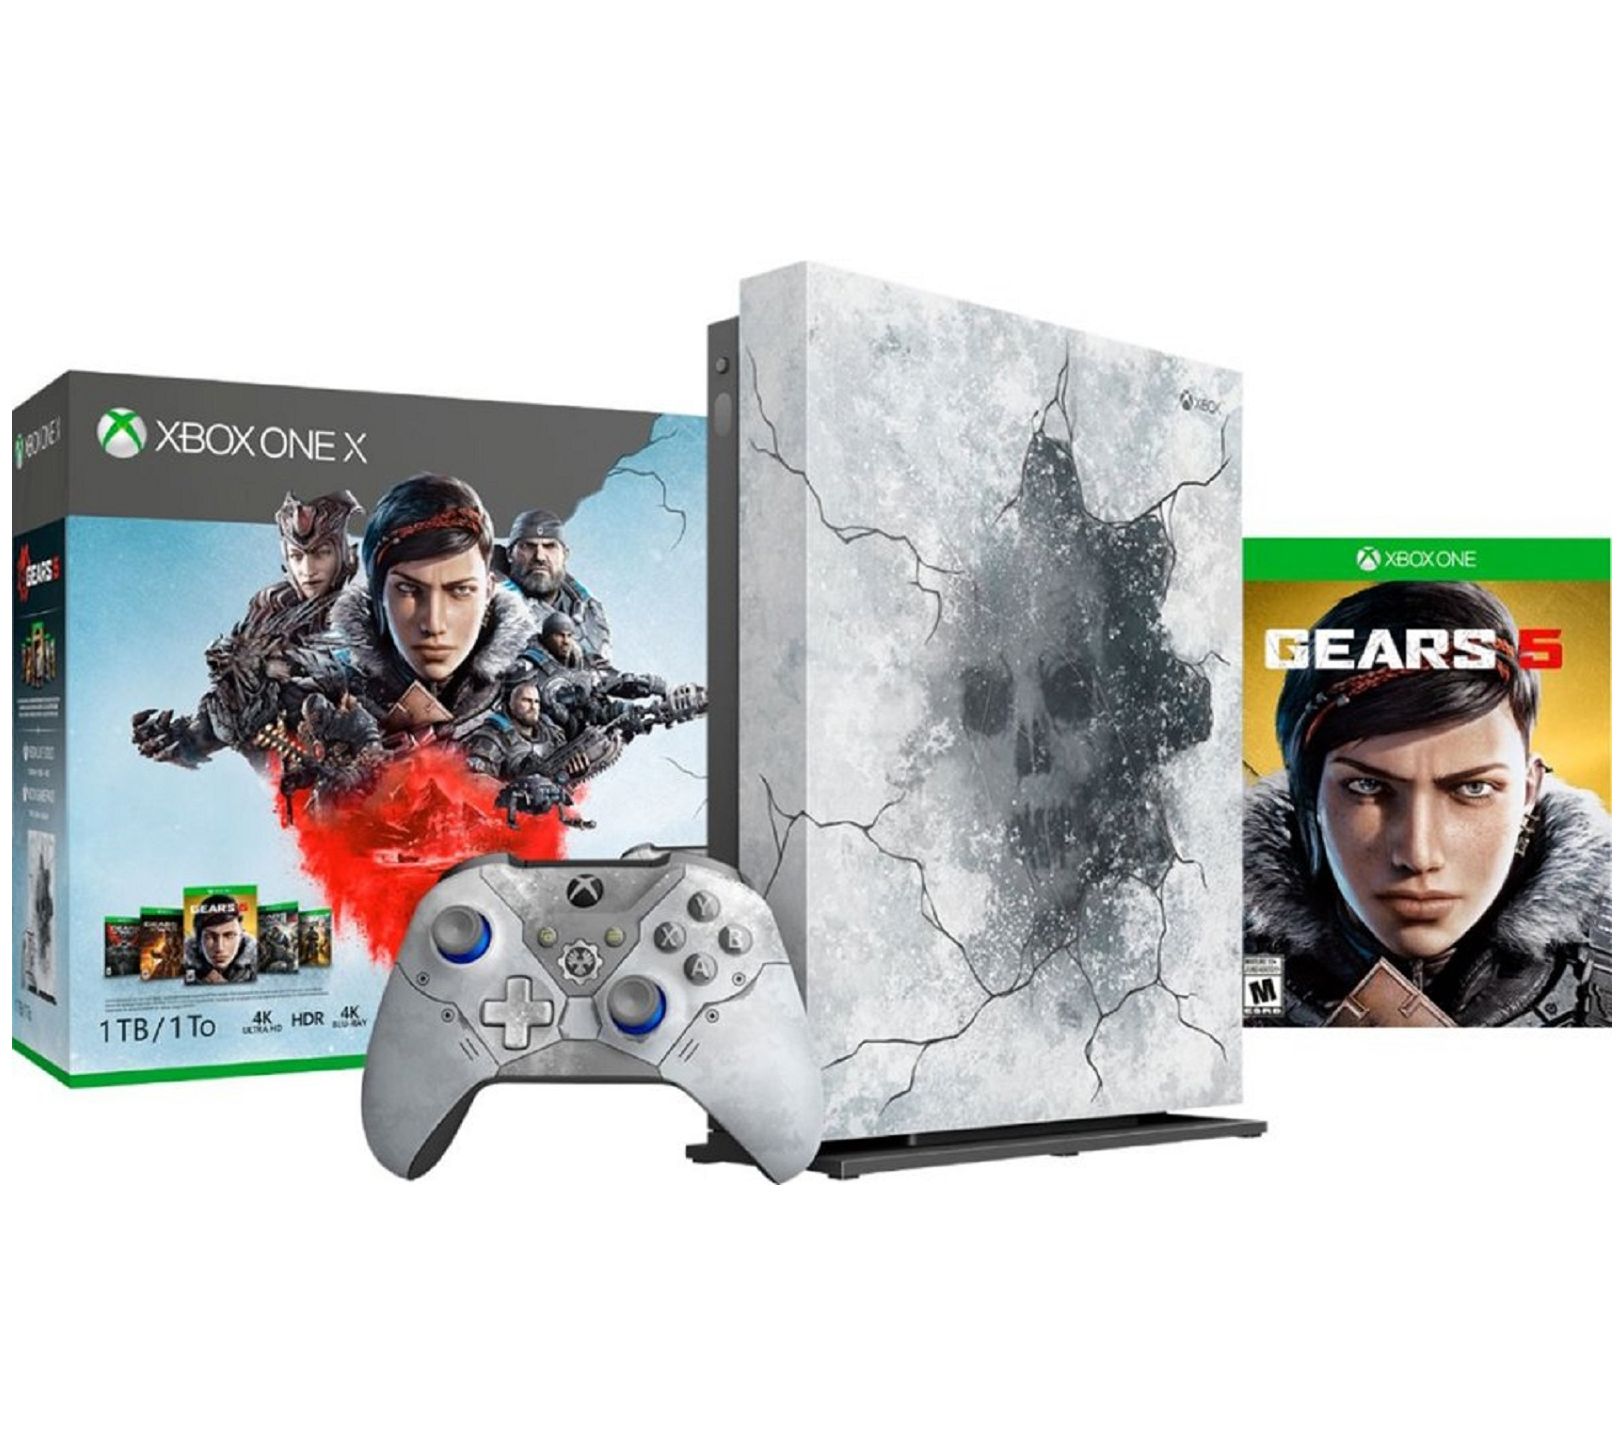 Microsoft Shows 'Gears of War 4' Xbox One S Console Bundle